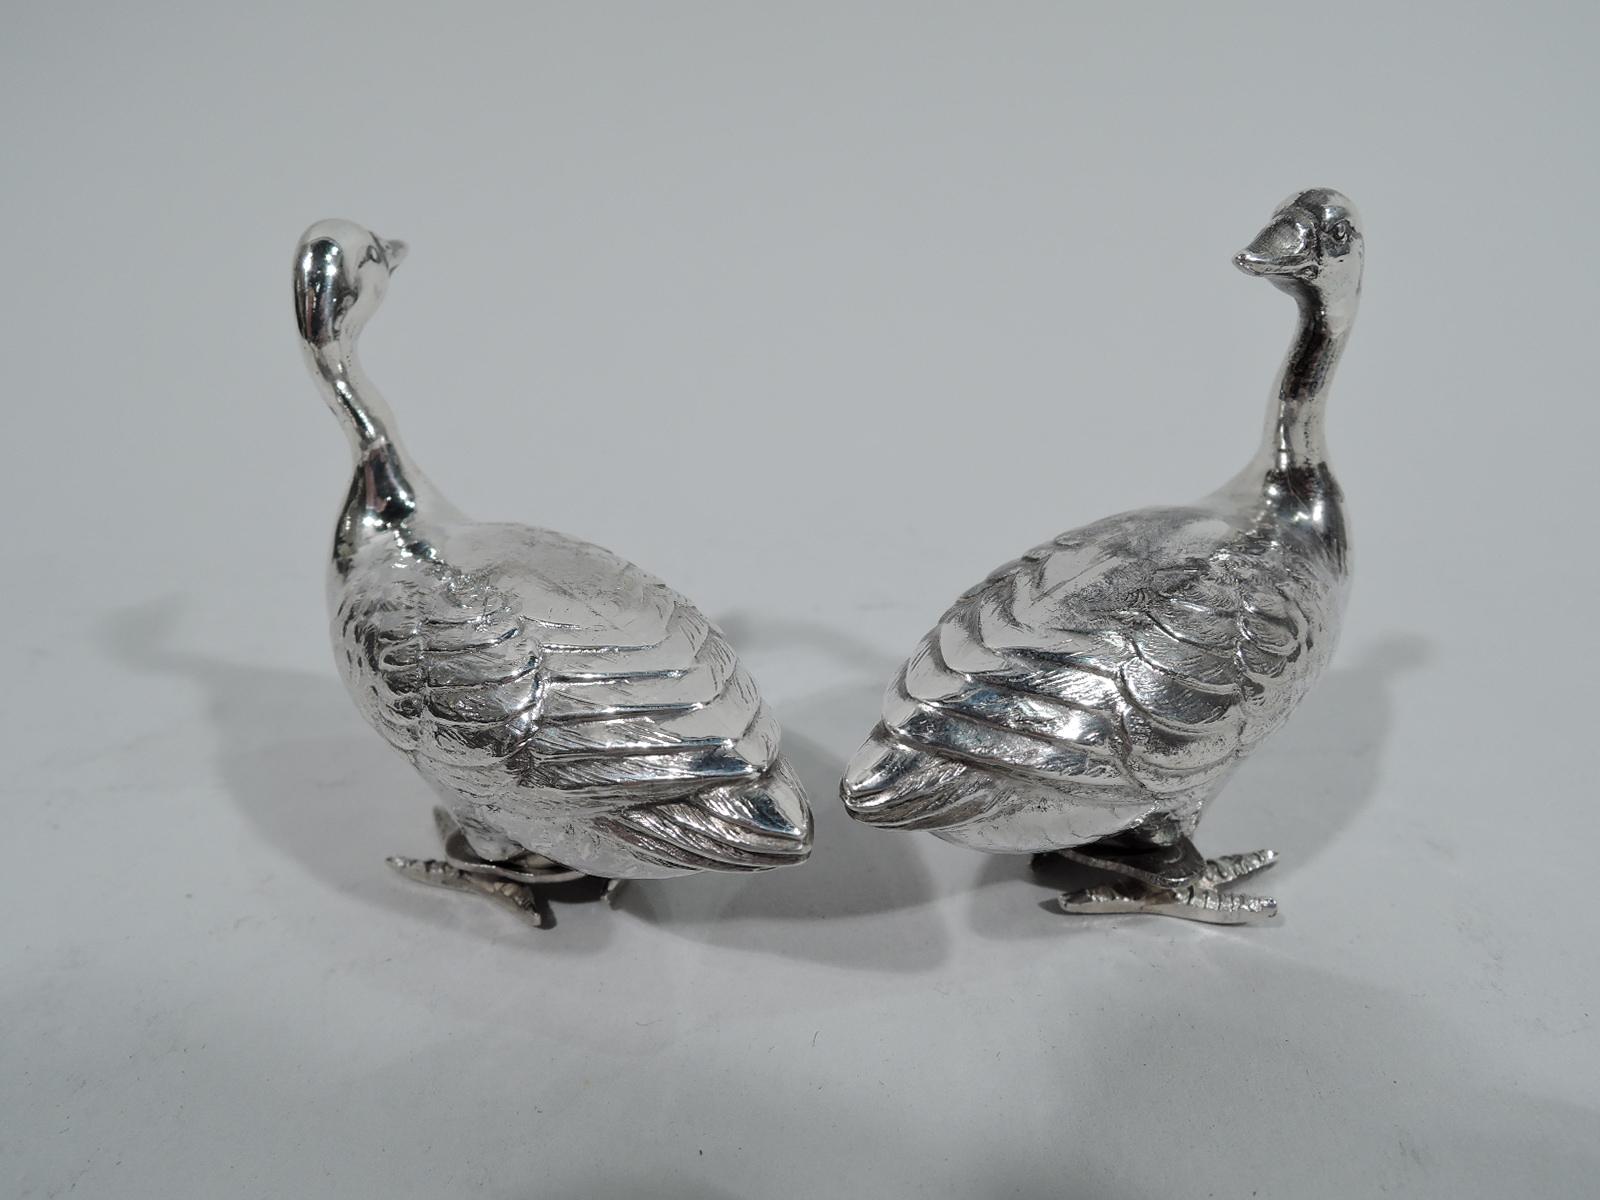 Pair of American sterling silver figural salt and pepper shakers, circa 1920. Each: A waddling goose with imbricated feathers and elongated neck. Scaly talons mounted to threaded cover. Breast pierced. One bird looks to the side, the other looks